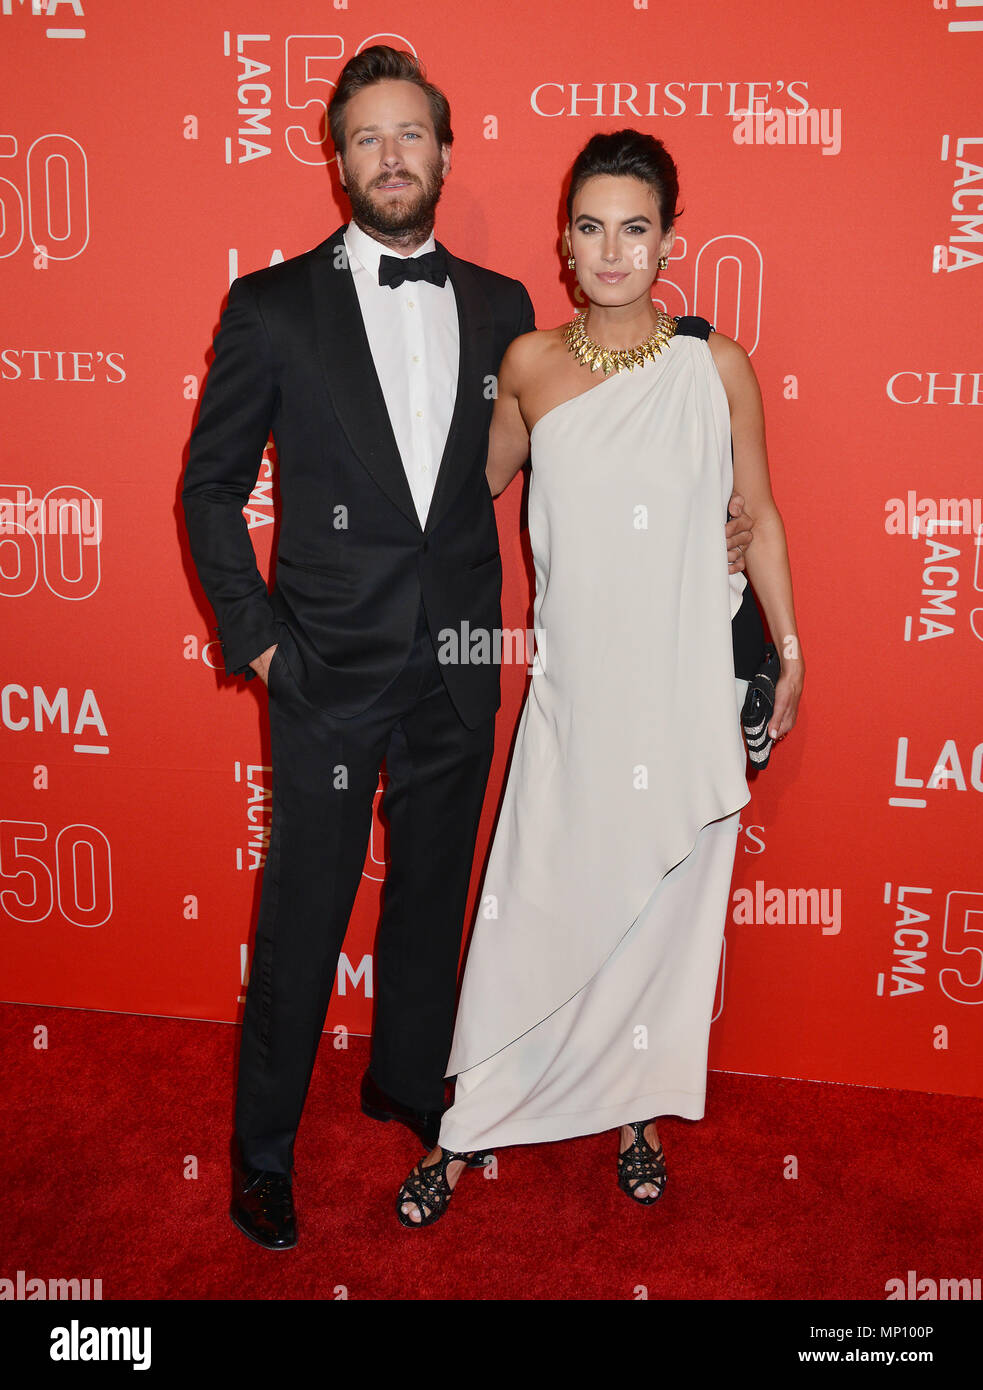 Armie Hammer and Wife Elizabeth Chambers 046 at the  LACMA 50th Ann. Gala 2015 at the LACMA Museum in Los Angeles. April 18, 2015.Armie Hammer and Wife Elizabeth Chambers 046 ------------- Red Carpet Event, Vertical, USA, Film Industry, Celebrities,  Photography, Bestof, Arts Culture and Entertainment, Topix Celebrities fashion /  Vertical, Best of, Event in Hollywood Life - California,  Red Carpet and backstage, USA, Film Industry, Celebrities,  movie celebrities, TV celebrities, Music celebrities, Photography, Bestof, Arts Culture and Entertainment,  Topix, vertical,  family from from the ye Stock Photo